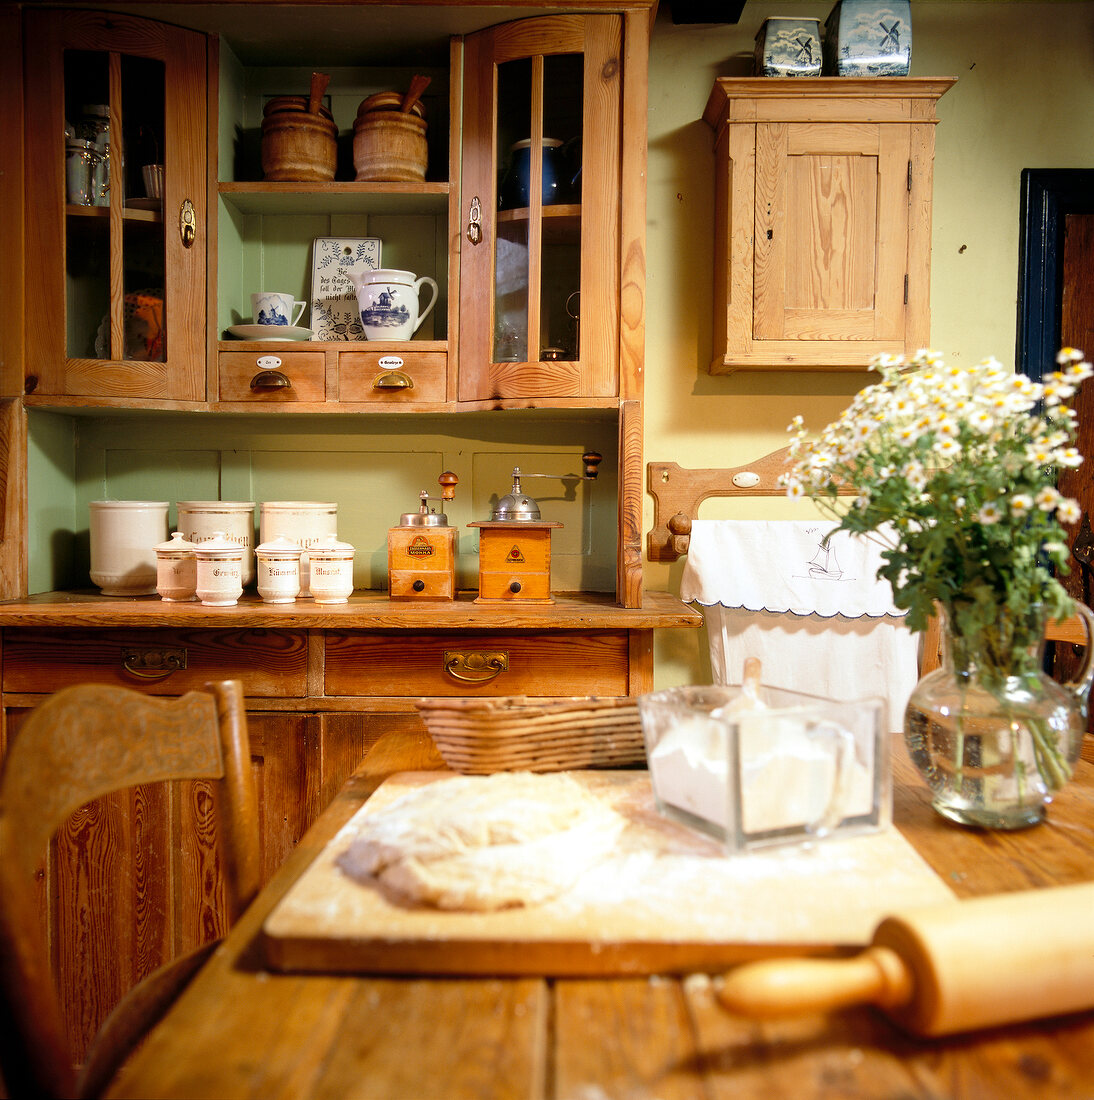 Dough and rolling pin on table in front of antique kitchen cabinet